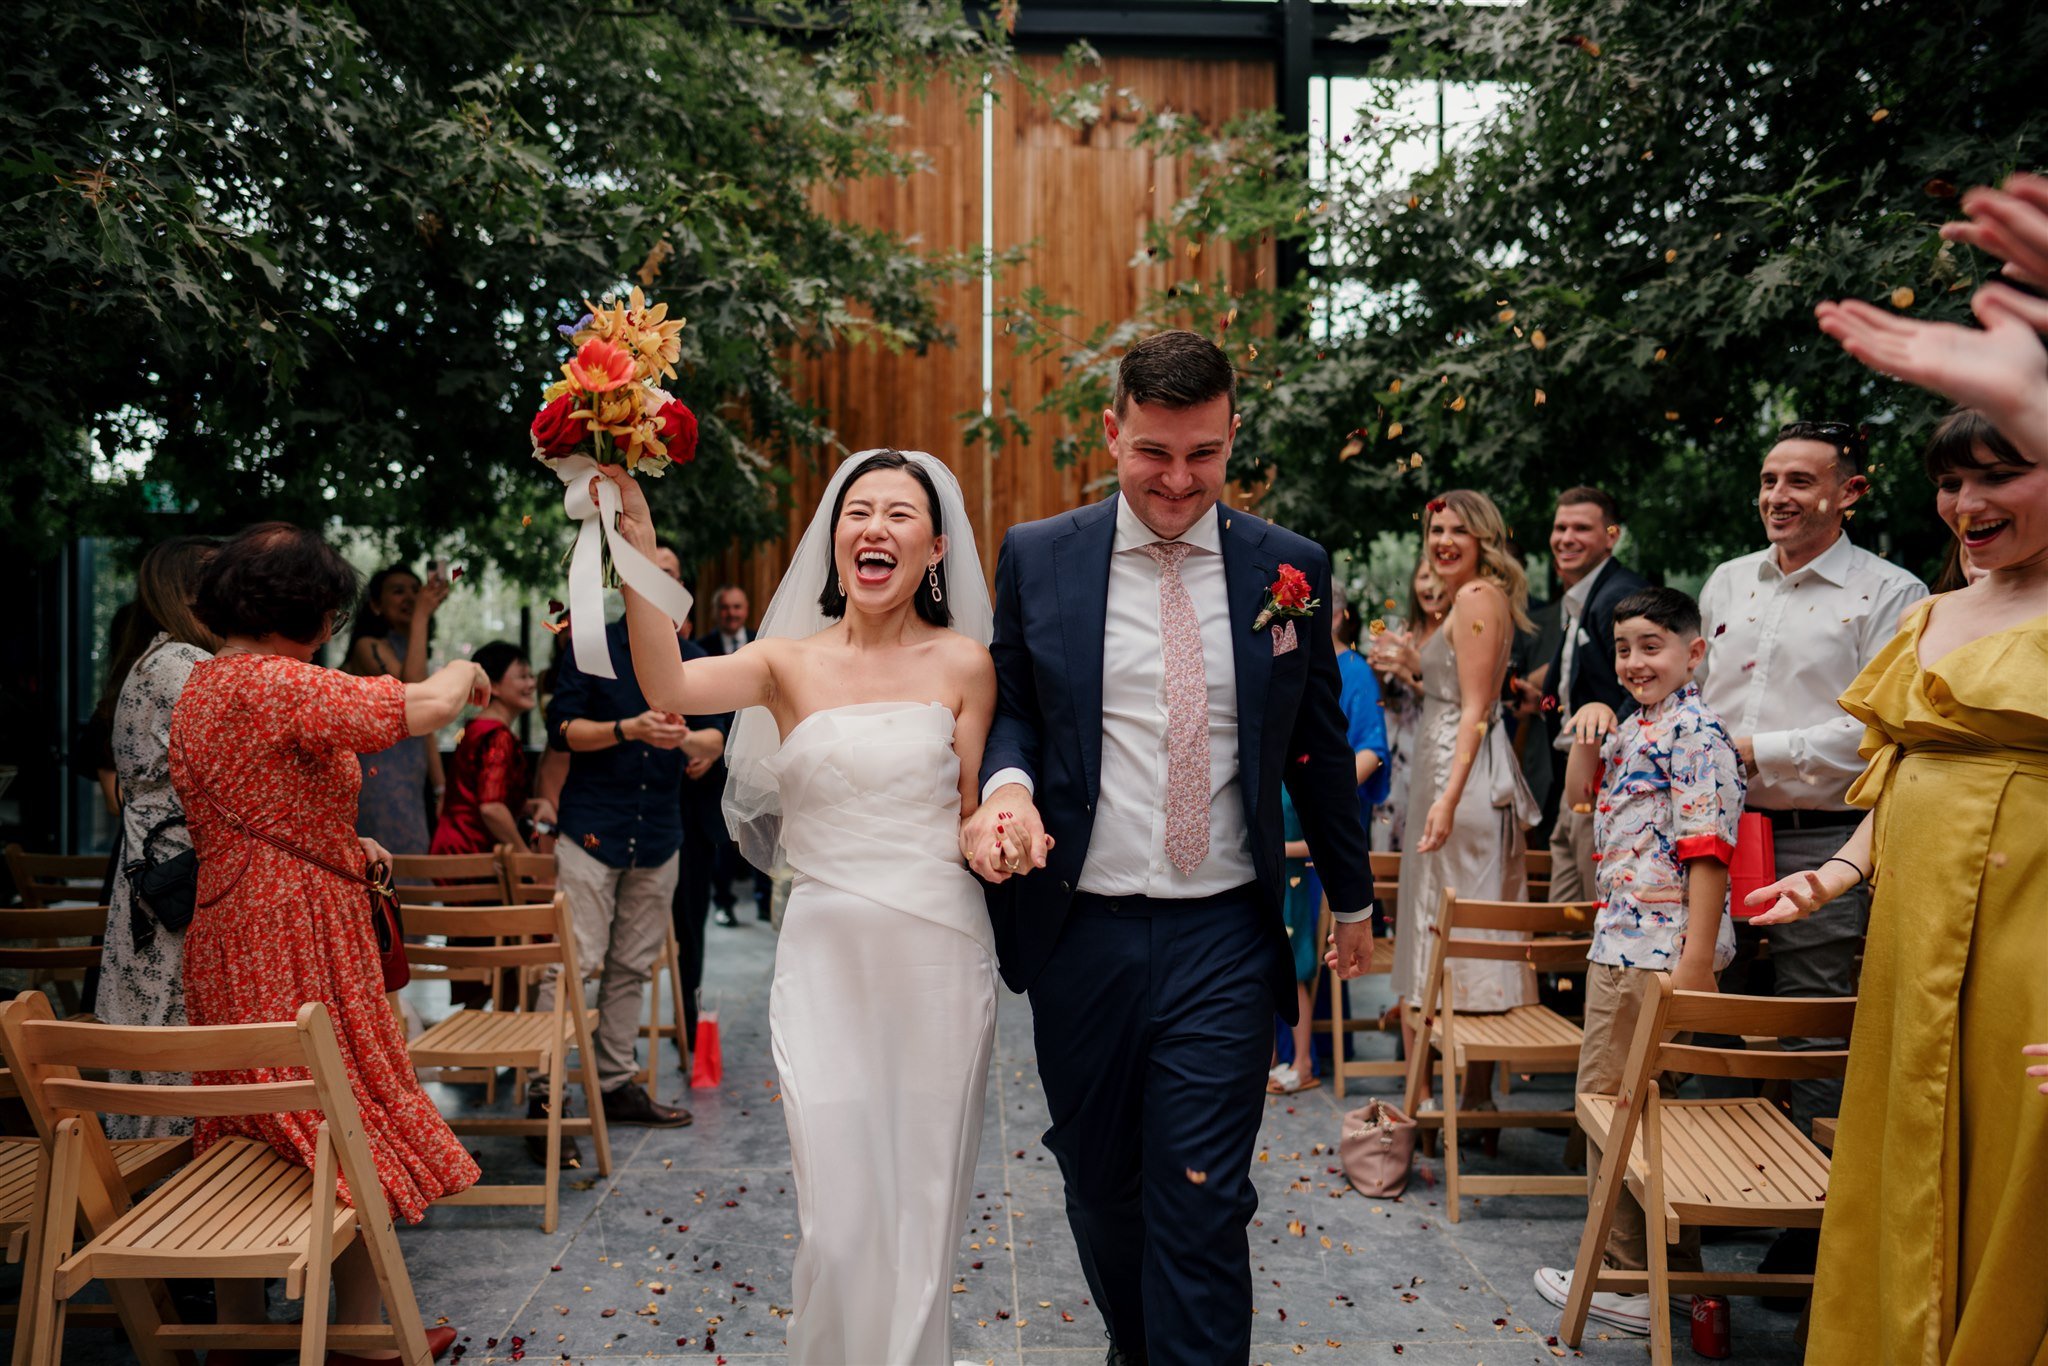 glasshouse-morningside-top-auckland-wedding-phtographer-photography-videography-film-new-zealand-NZ-best-urban-venue-stylish-intimate-central-ceremony-reception-dear-white-productions (16).jpg